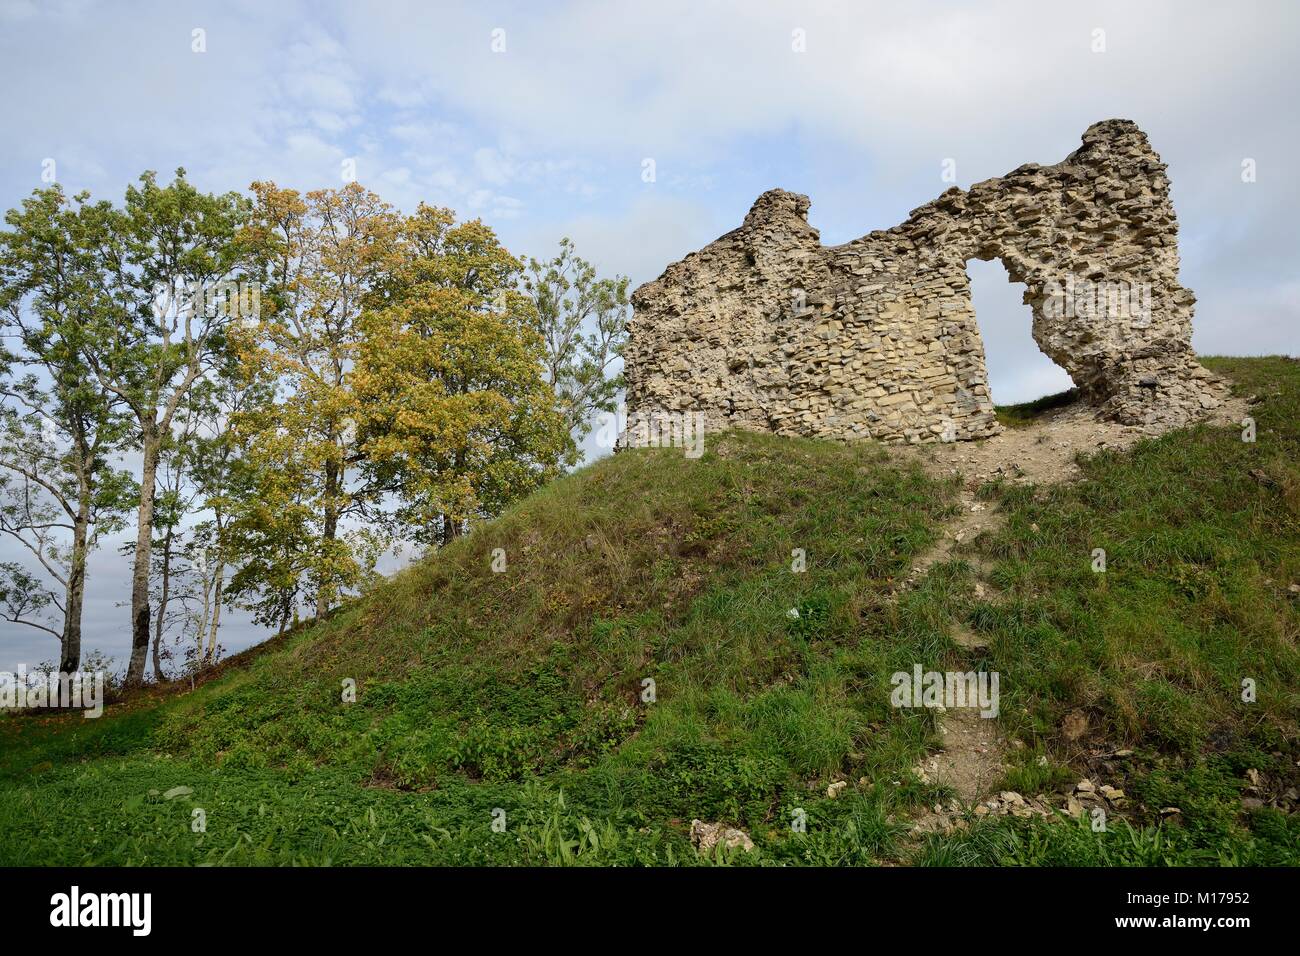 Ruins of the 13th century castle of the Order of the Teutonic Knights, Lihula, Estonia, September 2017. Stock Photo